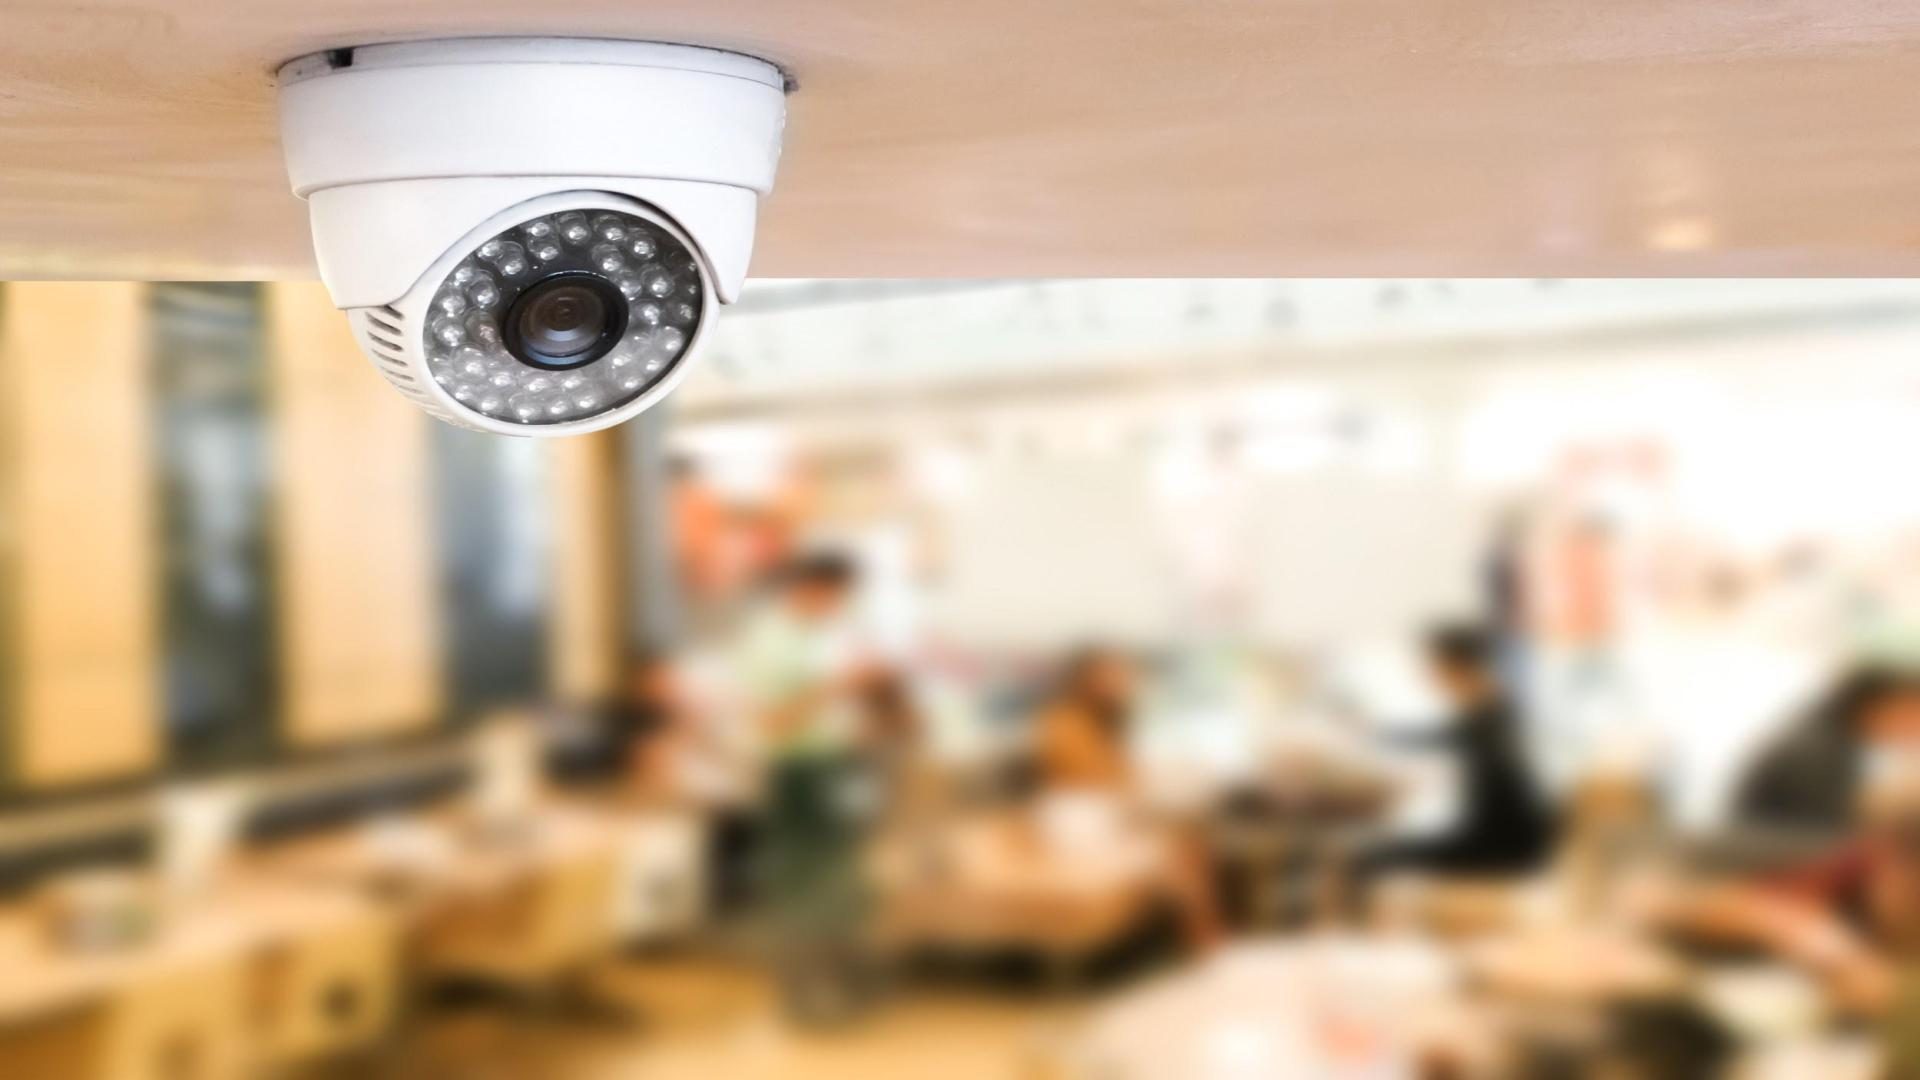 A security surveillance camera installed on the ceilling of an office.